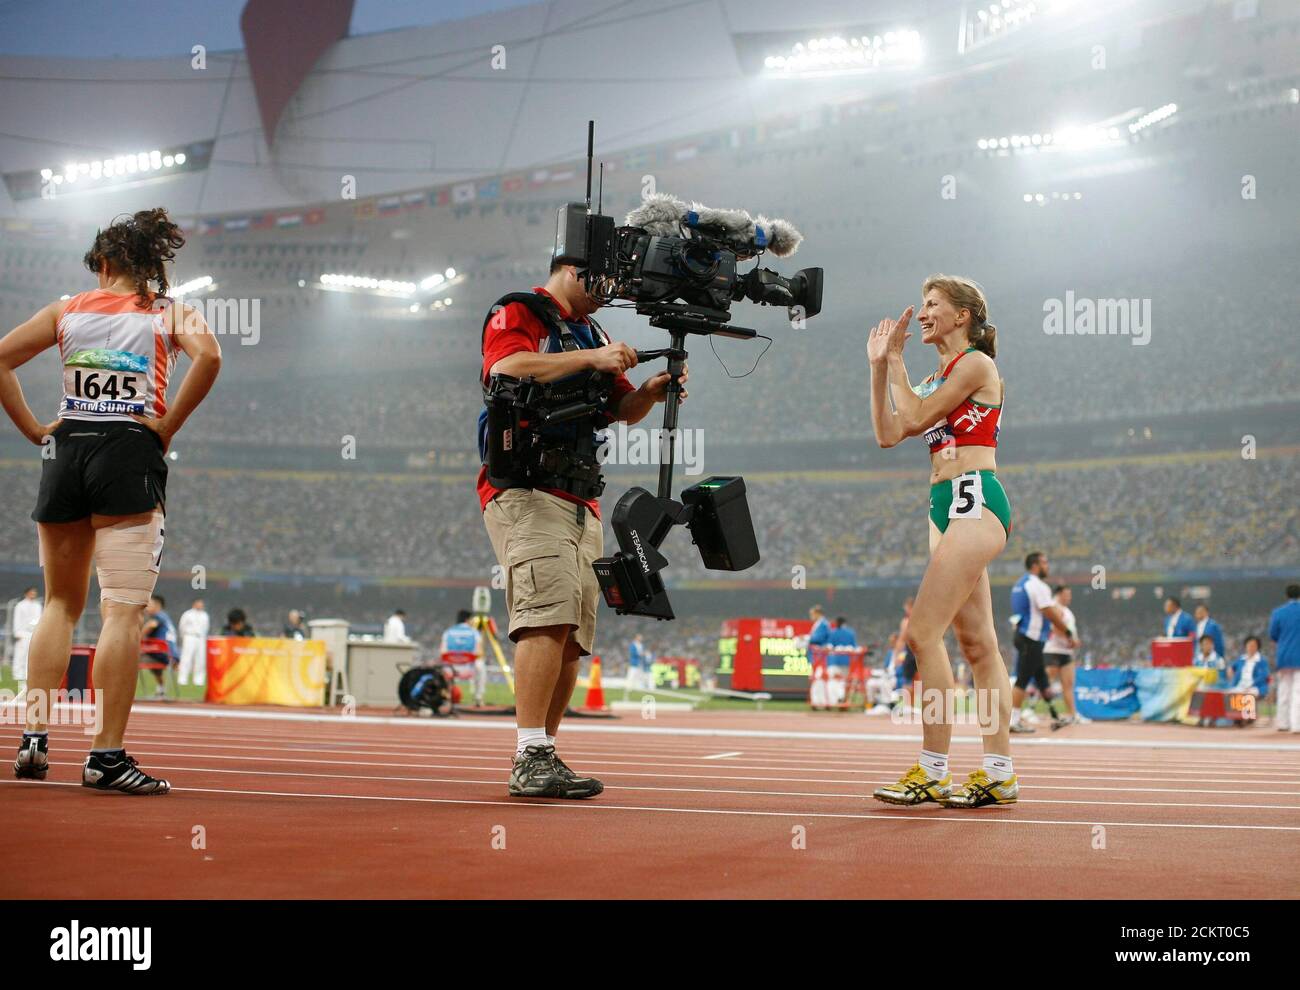 Beijing, China, September 15, 2008: Scenes from an evening session of the Paralympic Games at the Olympic Stadium, known as the Bird's Nest.  Track athlete Volha Zinkevich of Belarus (r) smiles for the Chinese network cameraman with a Steadicam after a semi-final victory.   ©Bob Daemmrich Stock Photo